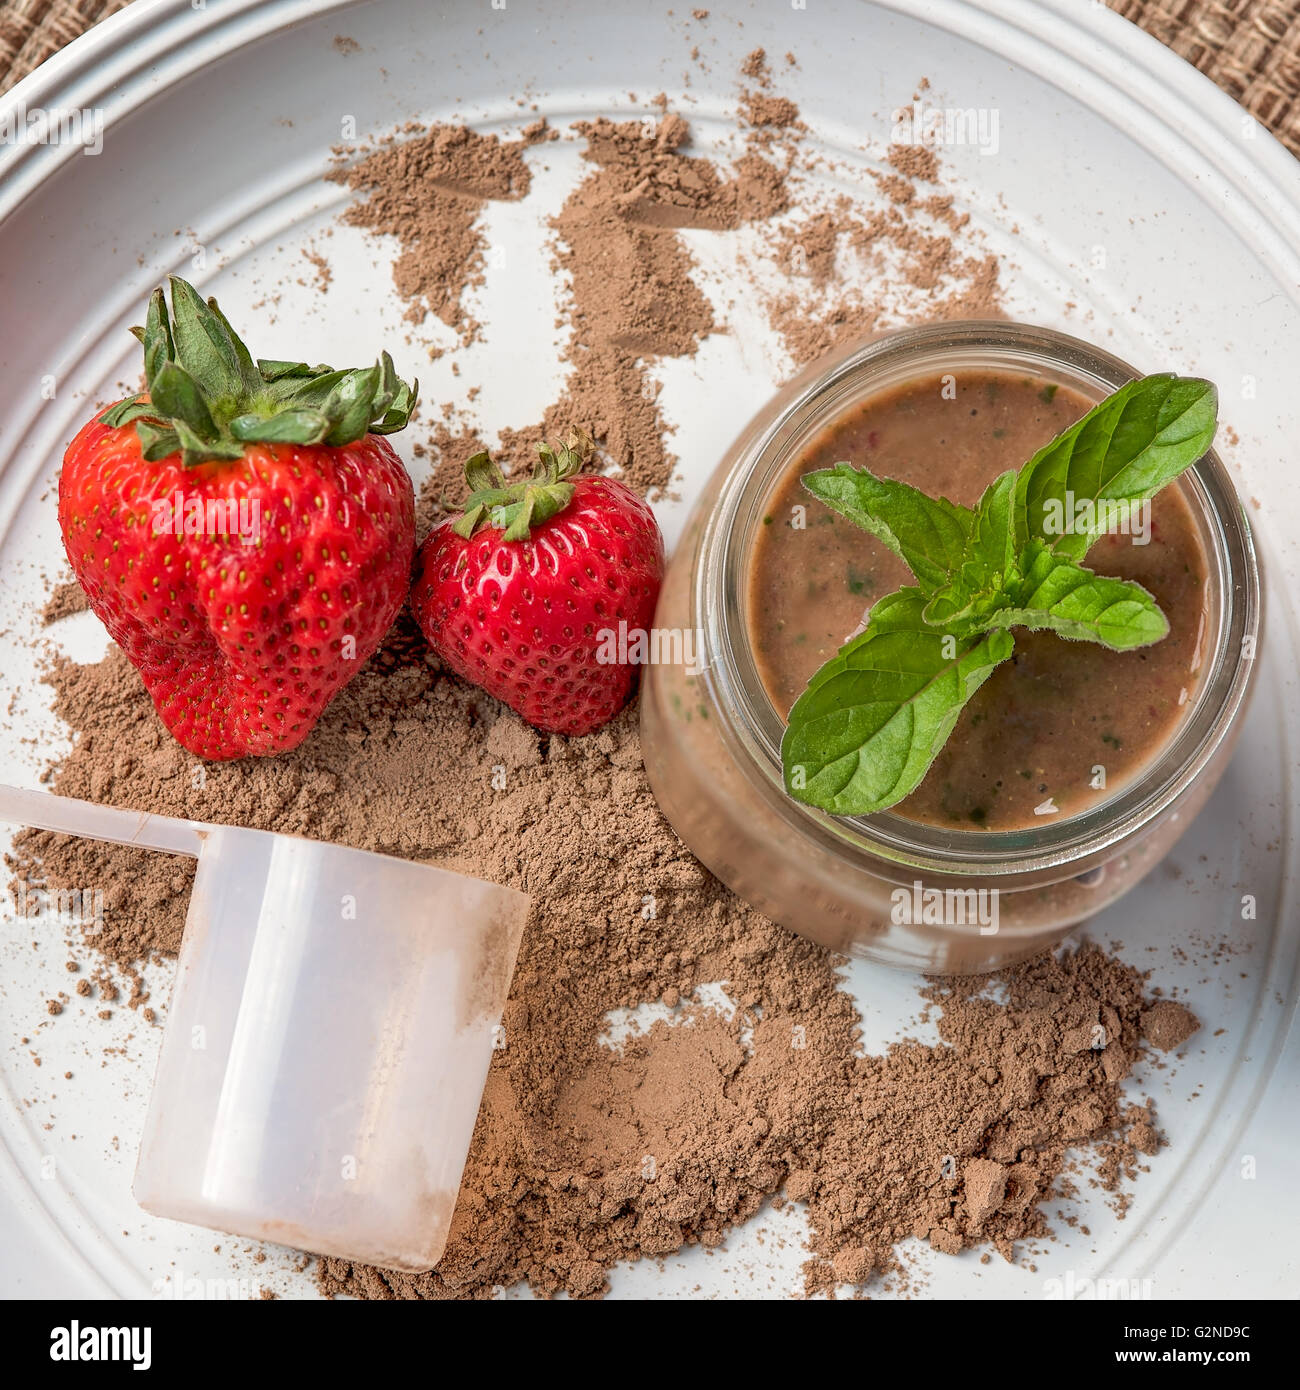 Powdered meal replacement shake looking down at jar, scoop, powder with strawberries and mint leaves Stock Photo